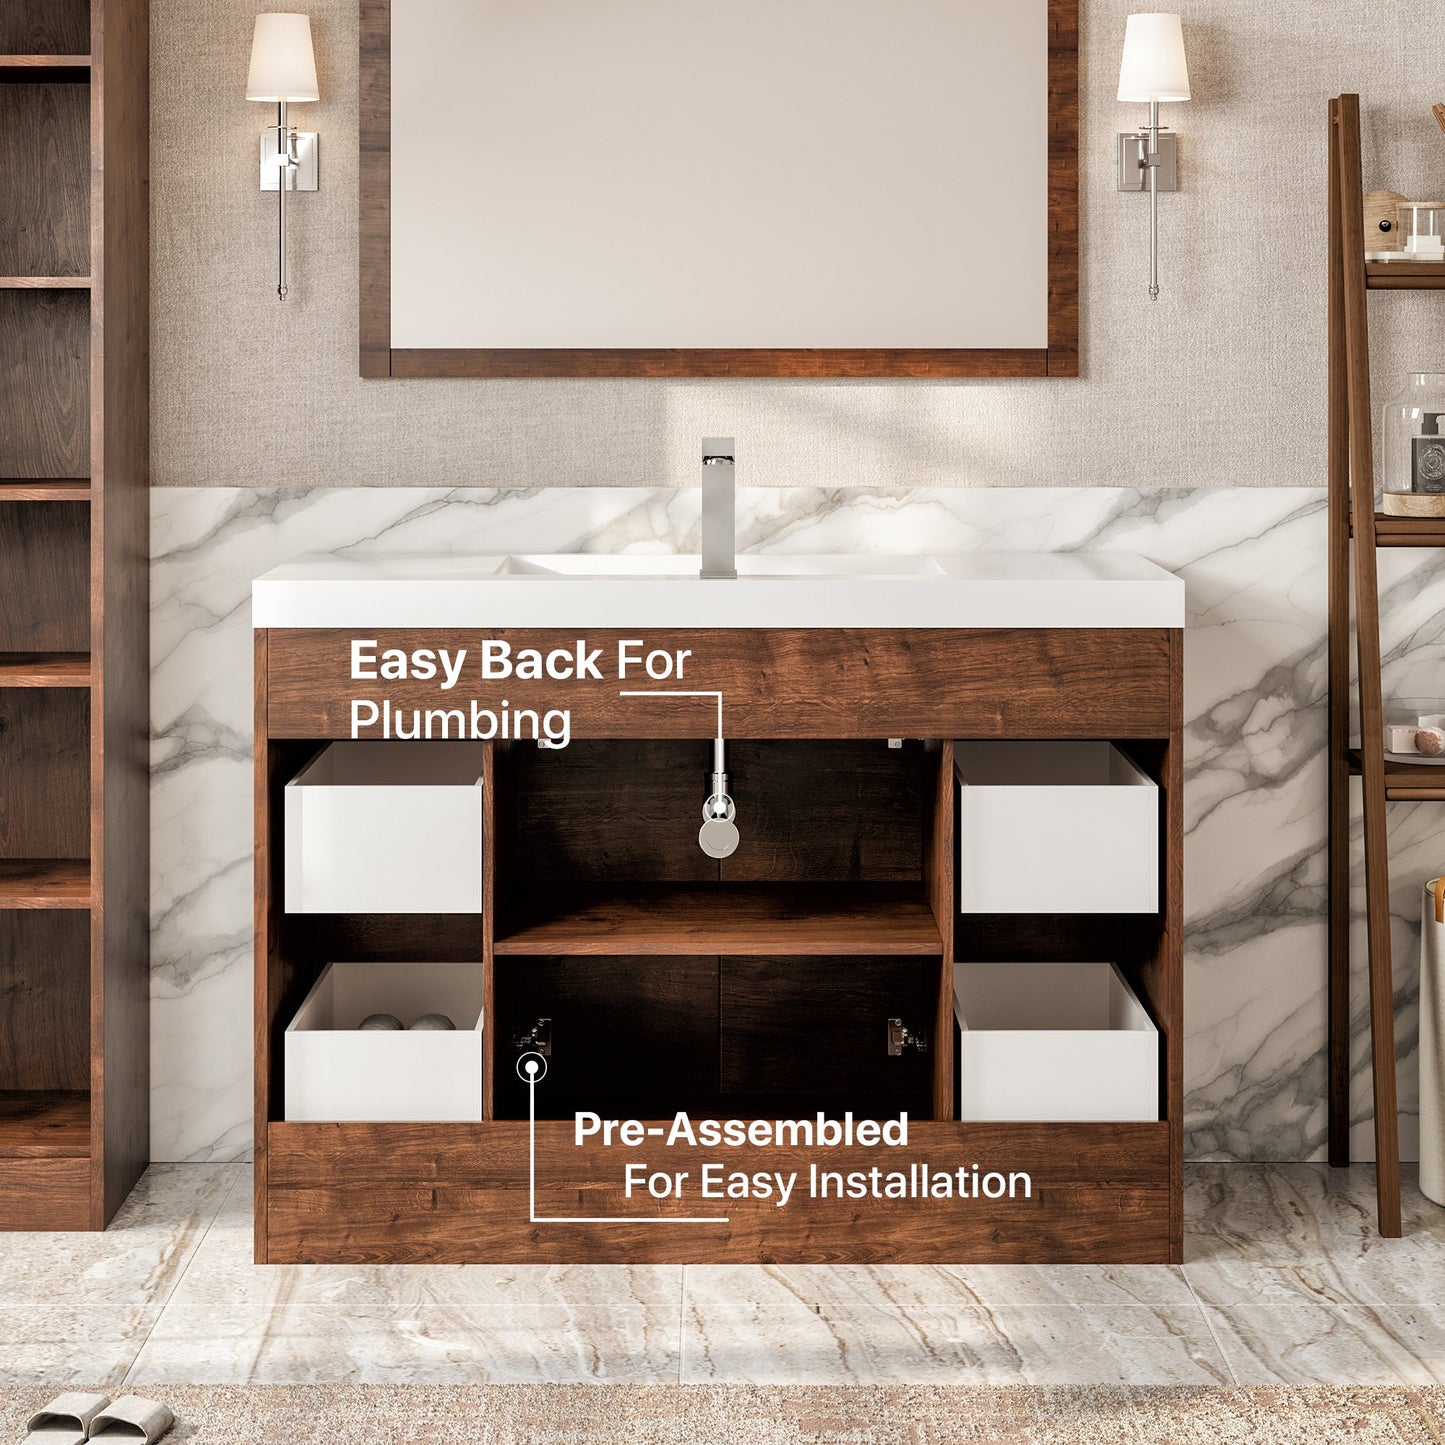 Lugano 48"W x 20" D Rosewood Bathroom Vanity with Acrylic Countertop and Integrated Sink